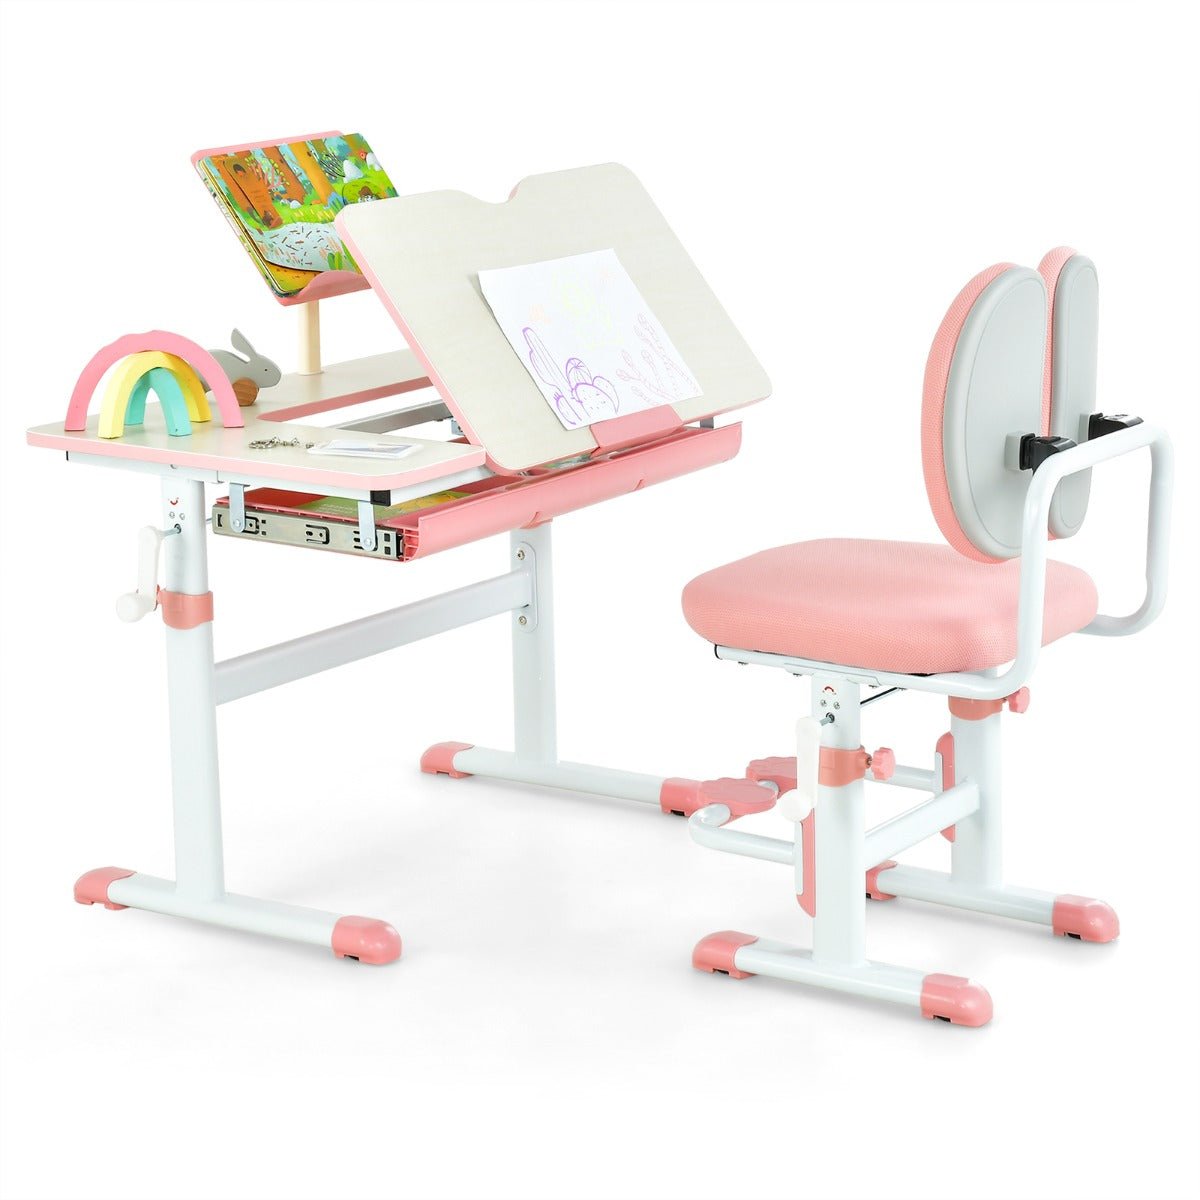 Shop Pink Kid's Study Desk & Chair Set - Perfect for Young Scholars